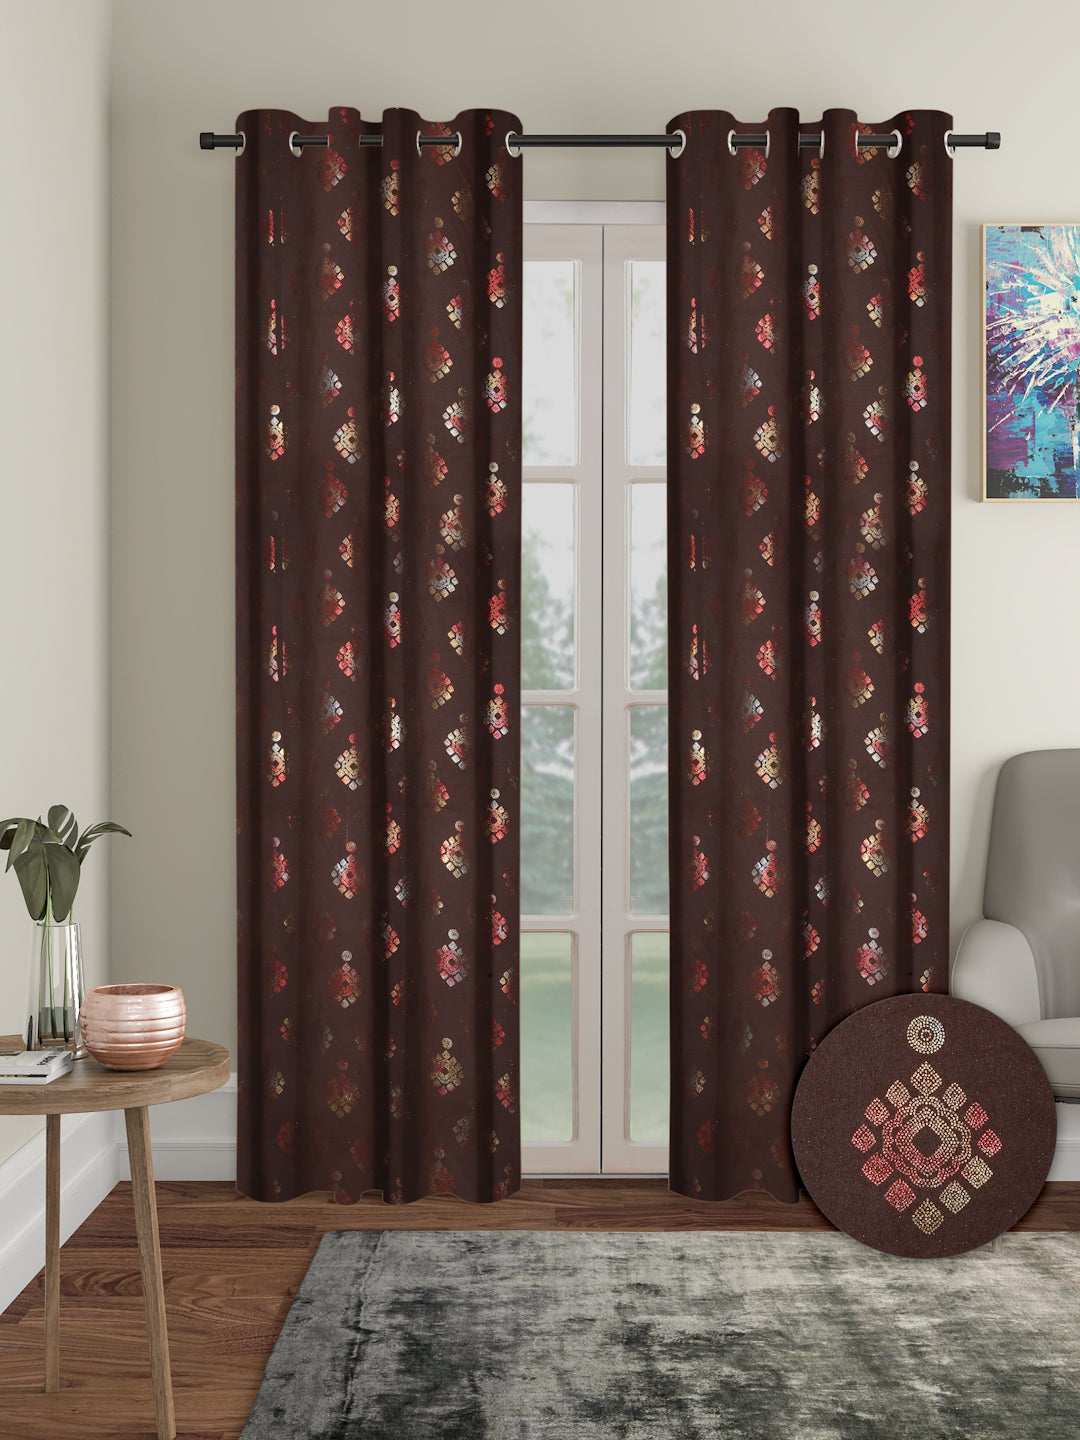 Pack of 2 Polyester Blackout Foil Long Door Curtains- Brown